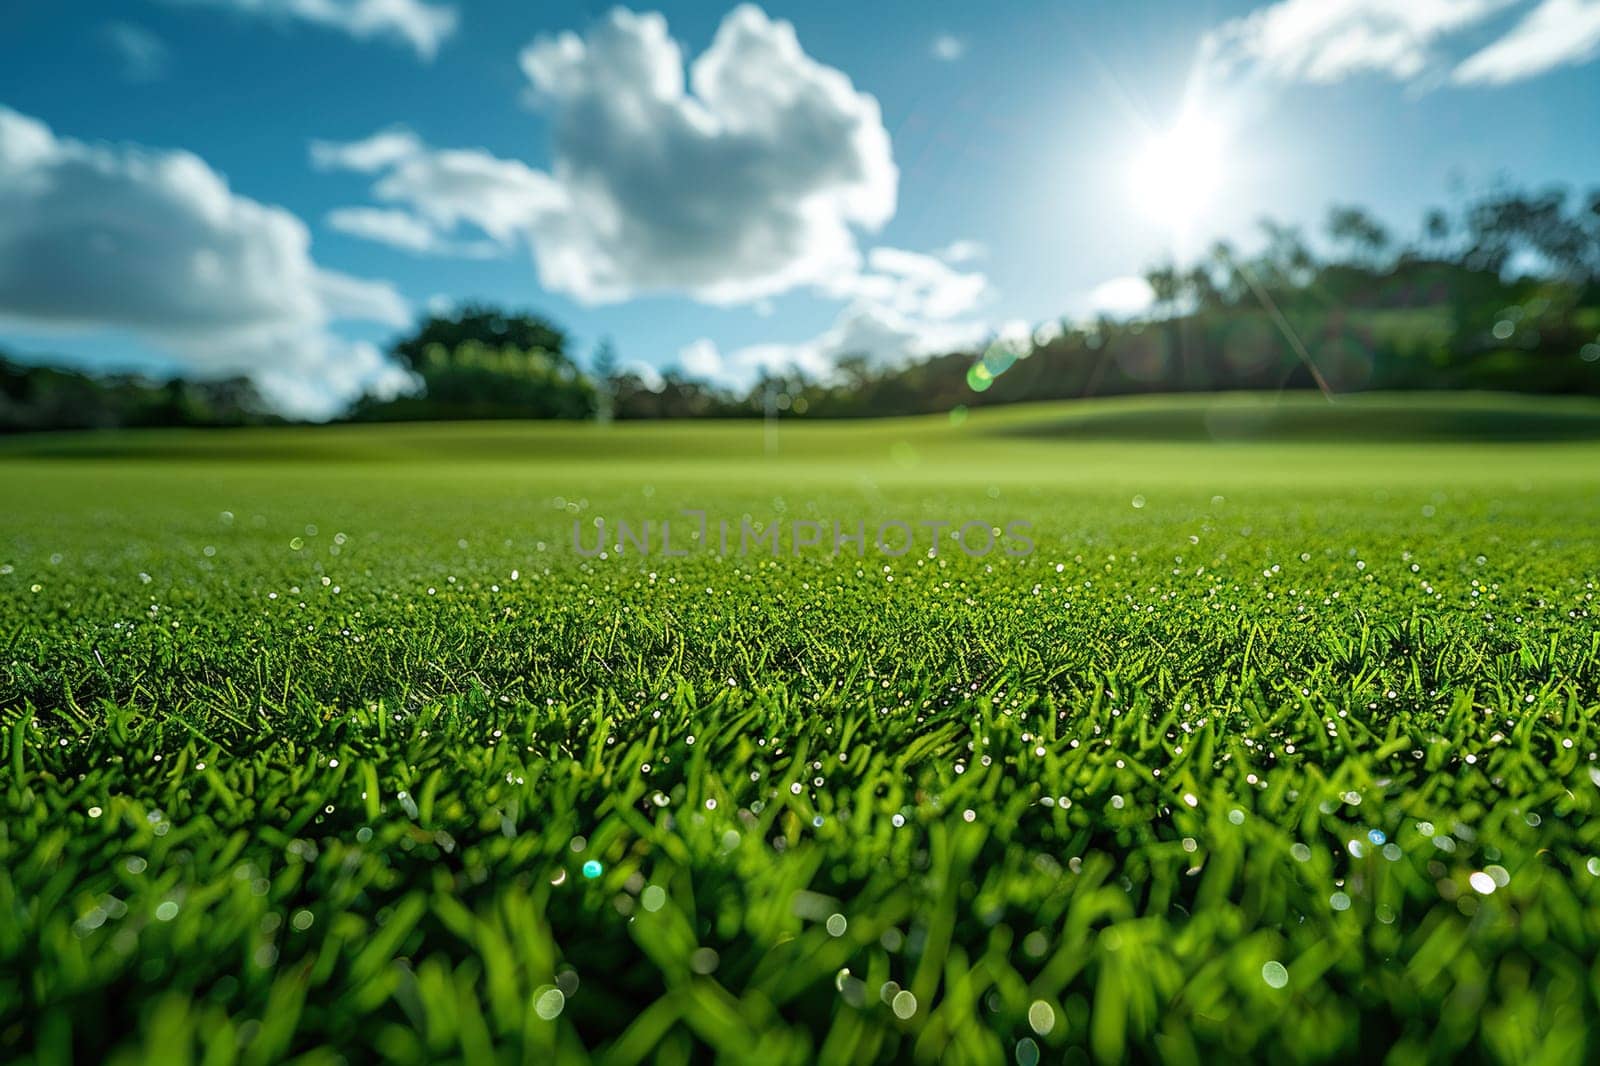 Wet grass close-up on a golf course on a sunny day. Generated by artificial intelligence by Vovmar